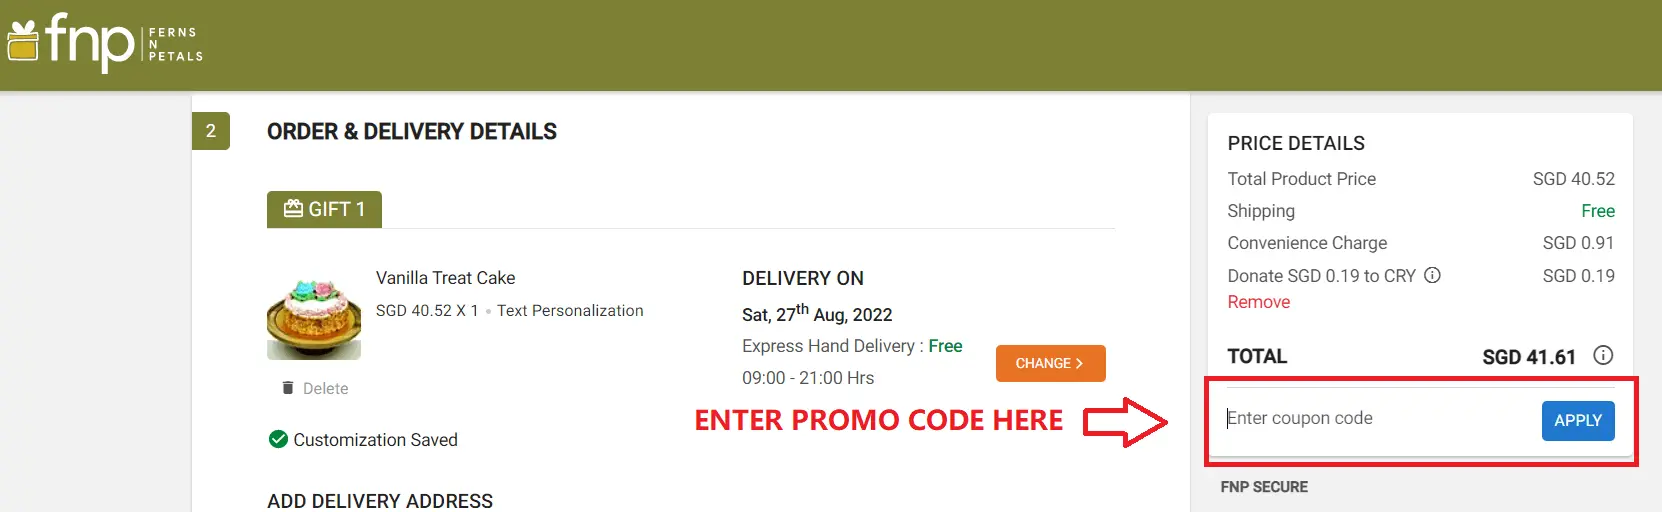 how to use ferns n petals promo code singapore